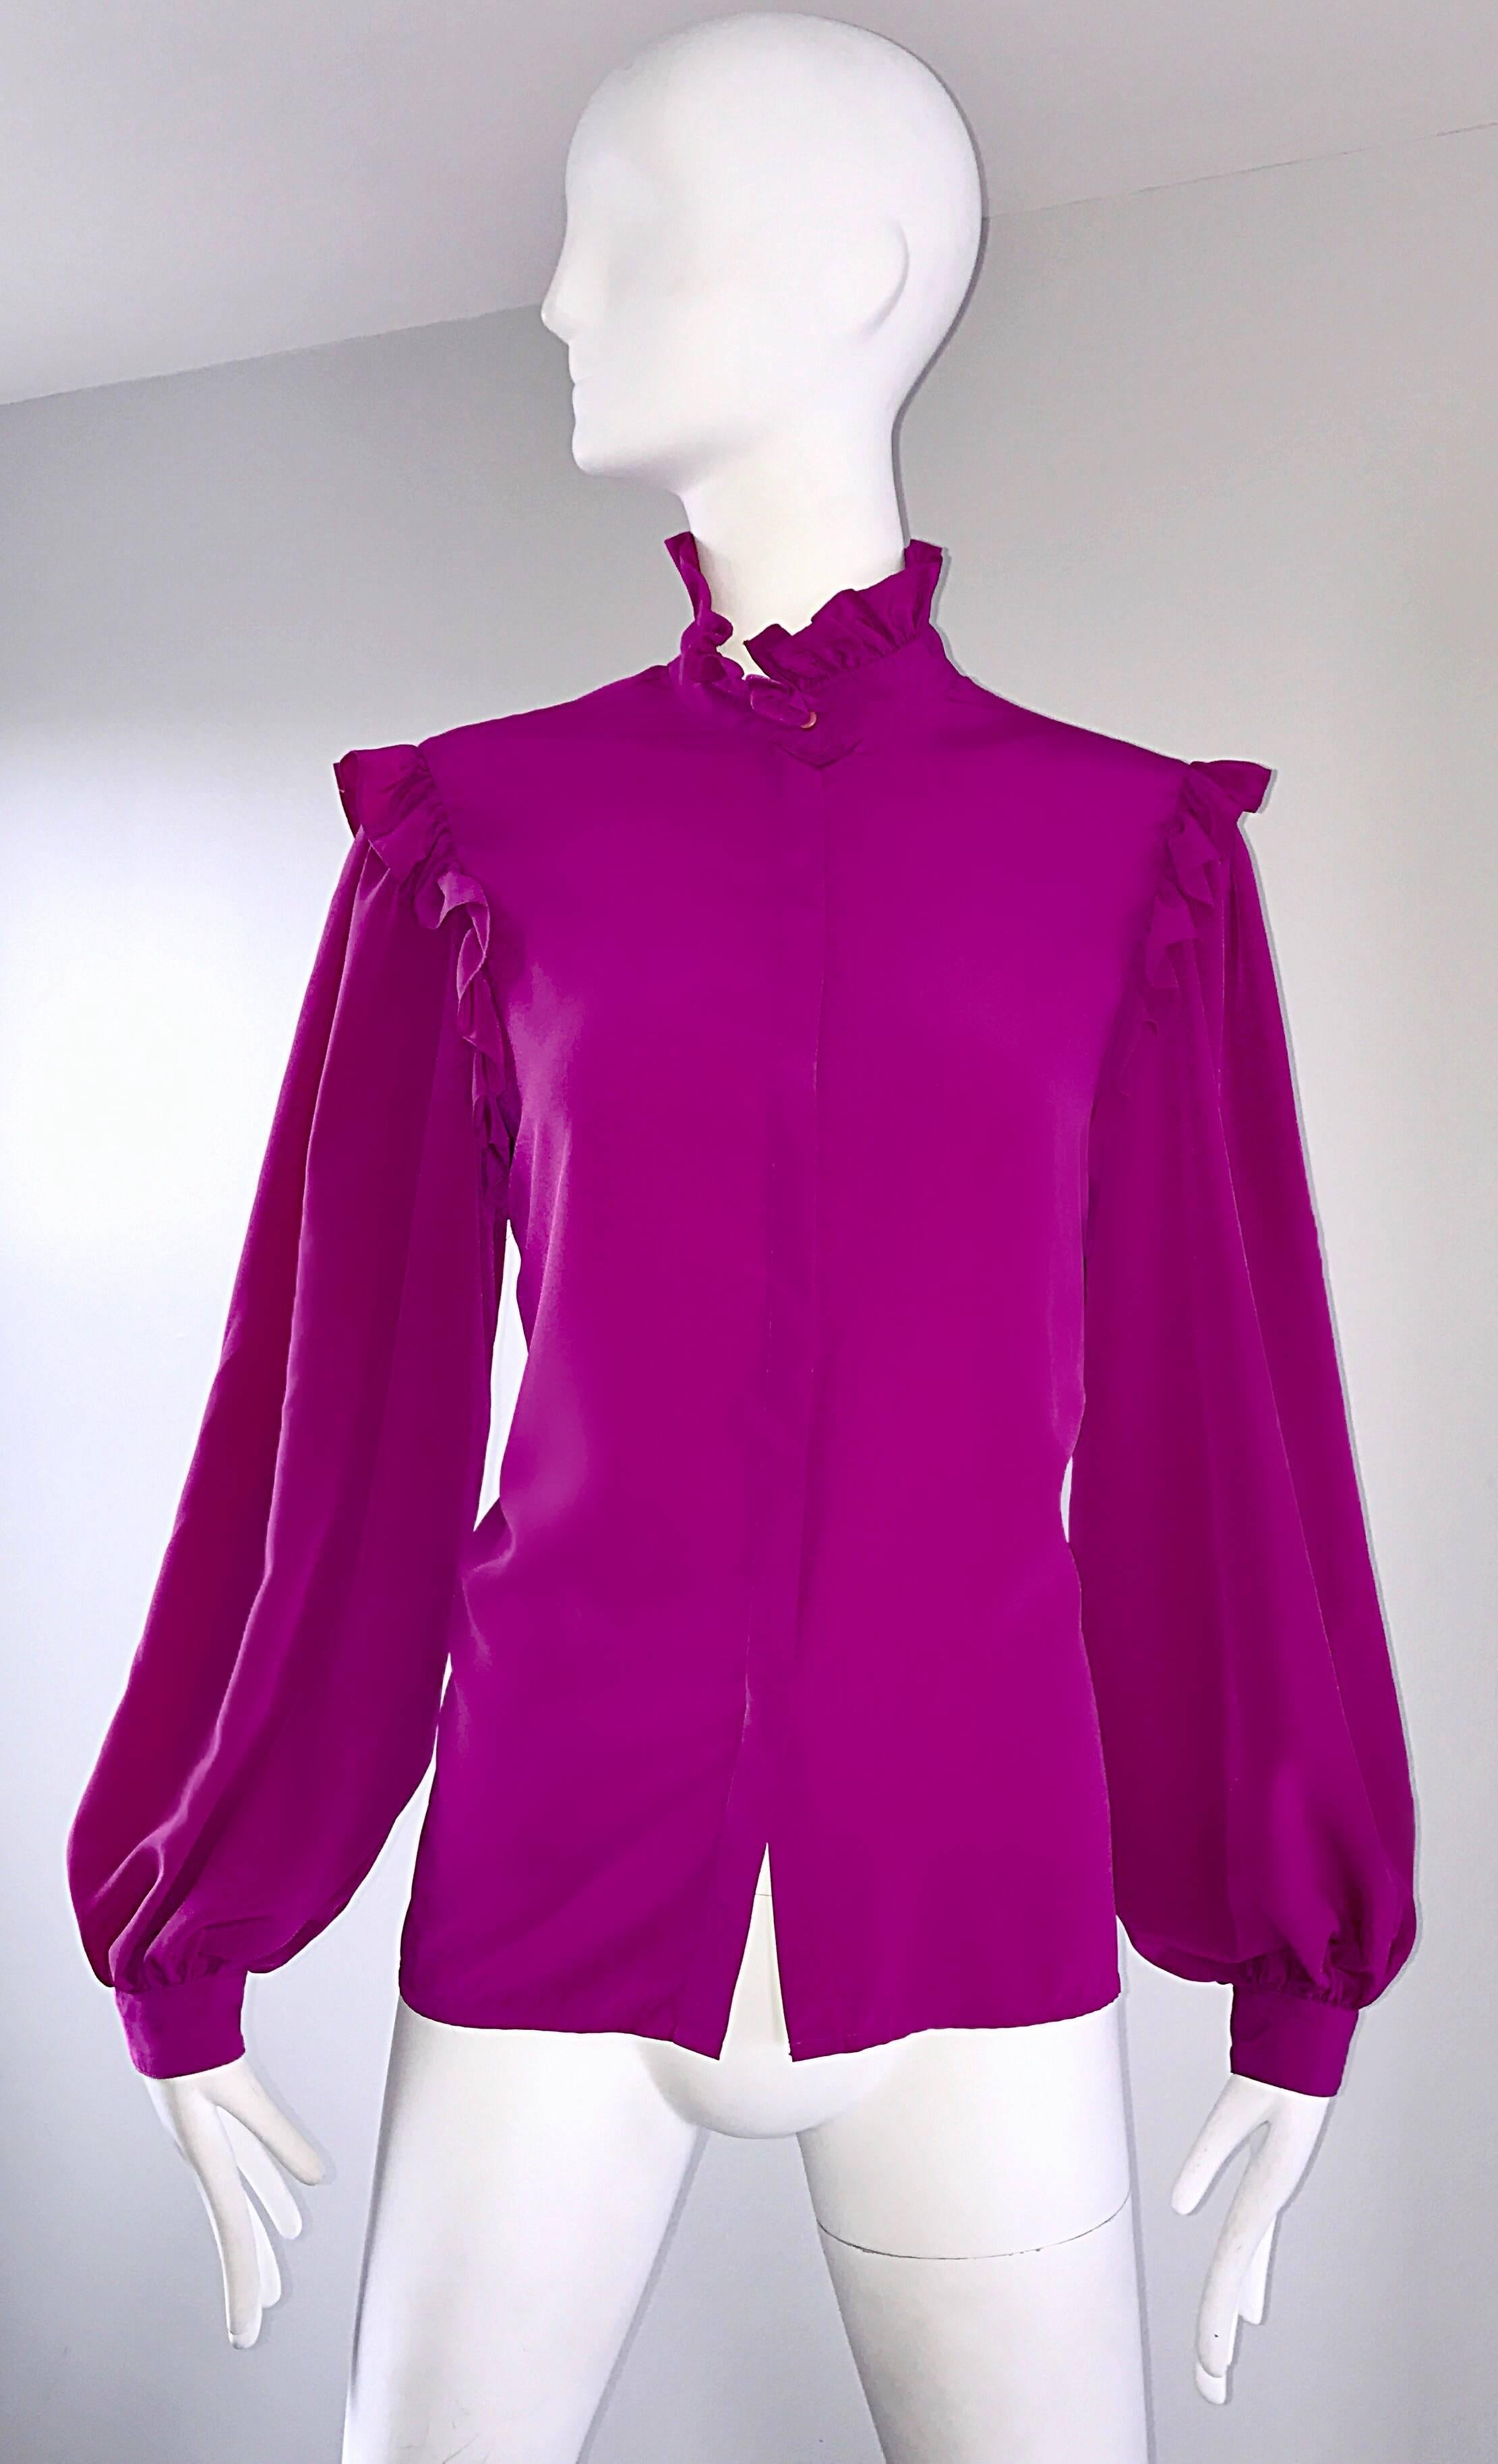 Effortlessly chic 70s OSCAR DE LA RENTA magenta pink silk top! Features a Victorian inspired ruffle neckline, with matching ruffles at each shoulder seam. Nice full bishop sleeves look amazing on! Hidden buttons up the front of the bodice, and